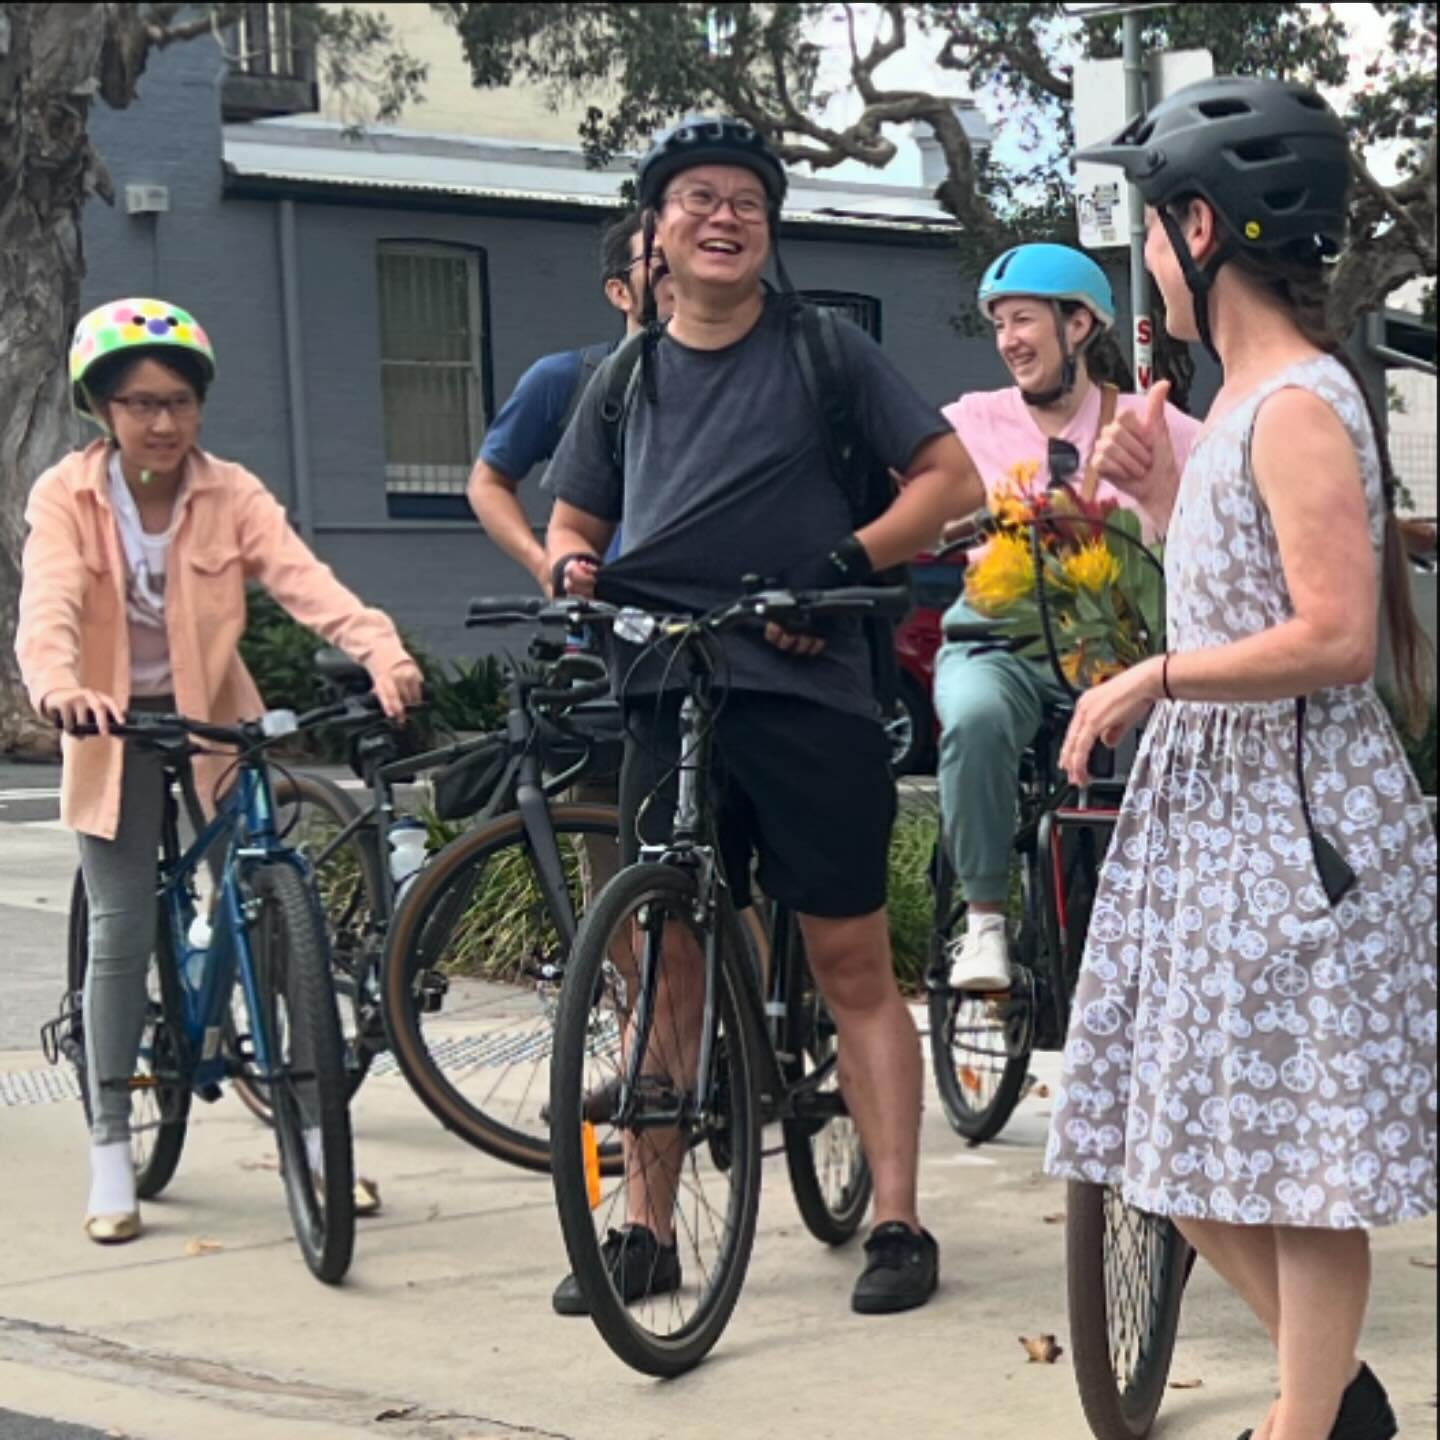 City of Sydney&rsquo;s free guided ride program is there for you to get on your bike, have fun, ask questions, share your own stories, learn about the evolving bike friendly network, and see first hand how for many journeys the city can be #betterbyb